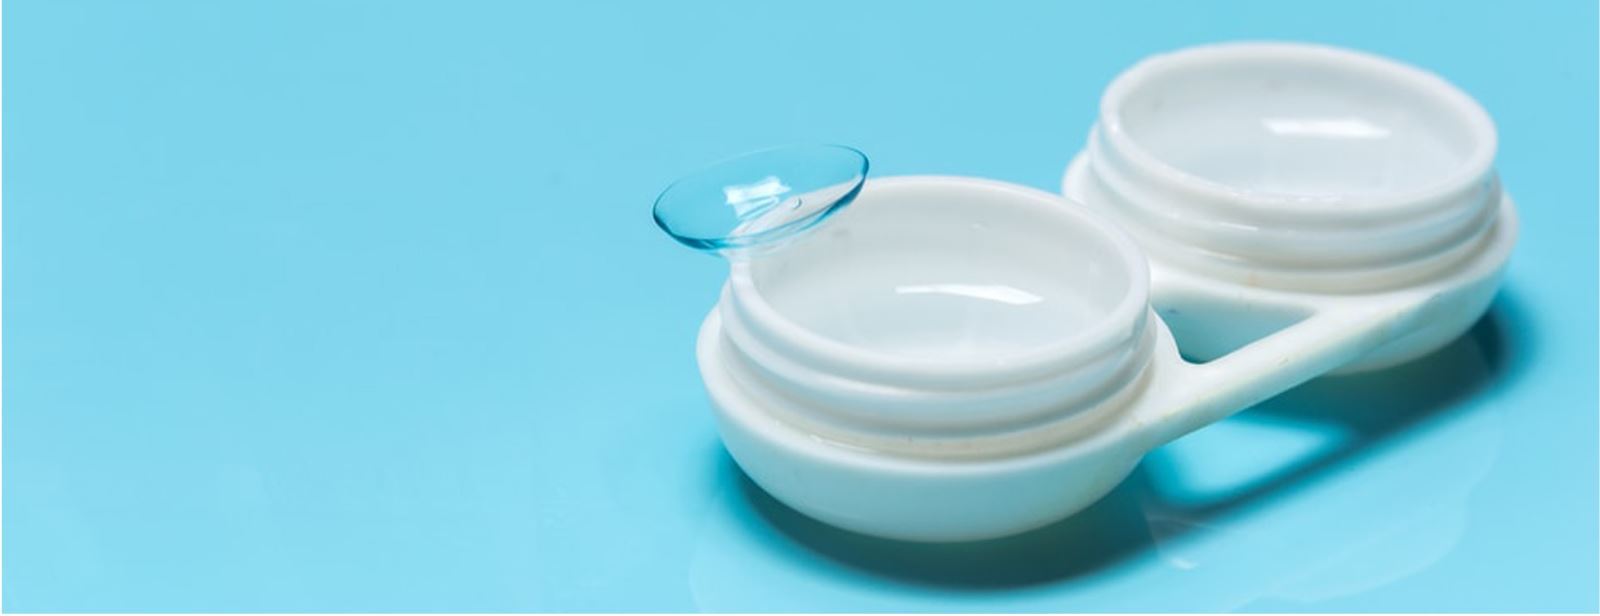 Contact Lenses: Making the decision for your vision